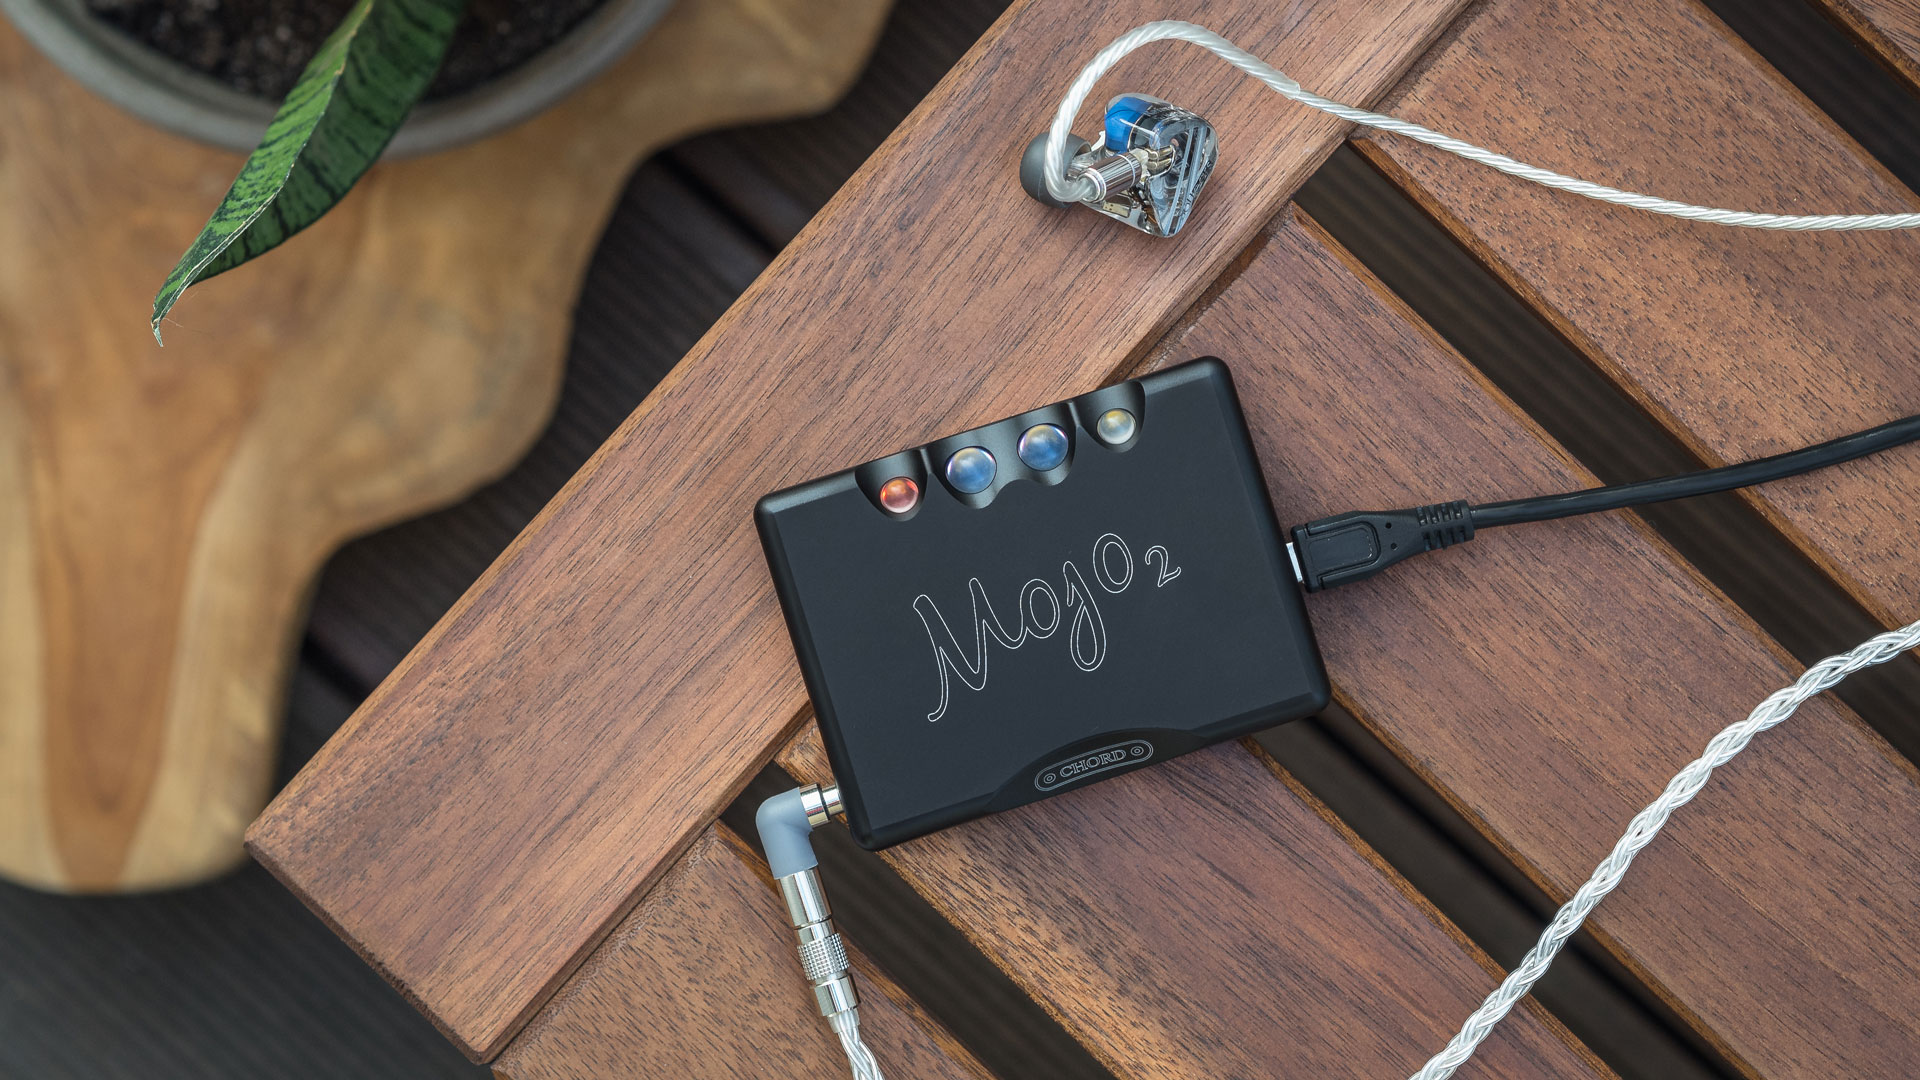 The new Mojo 2 from Chord (Image Credit: Chord Electronics)